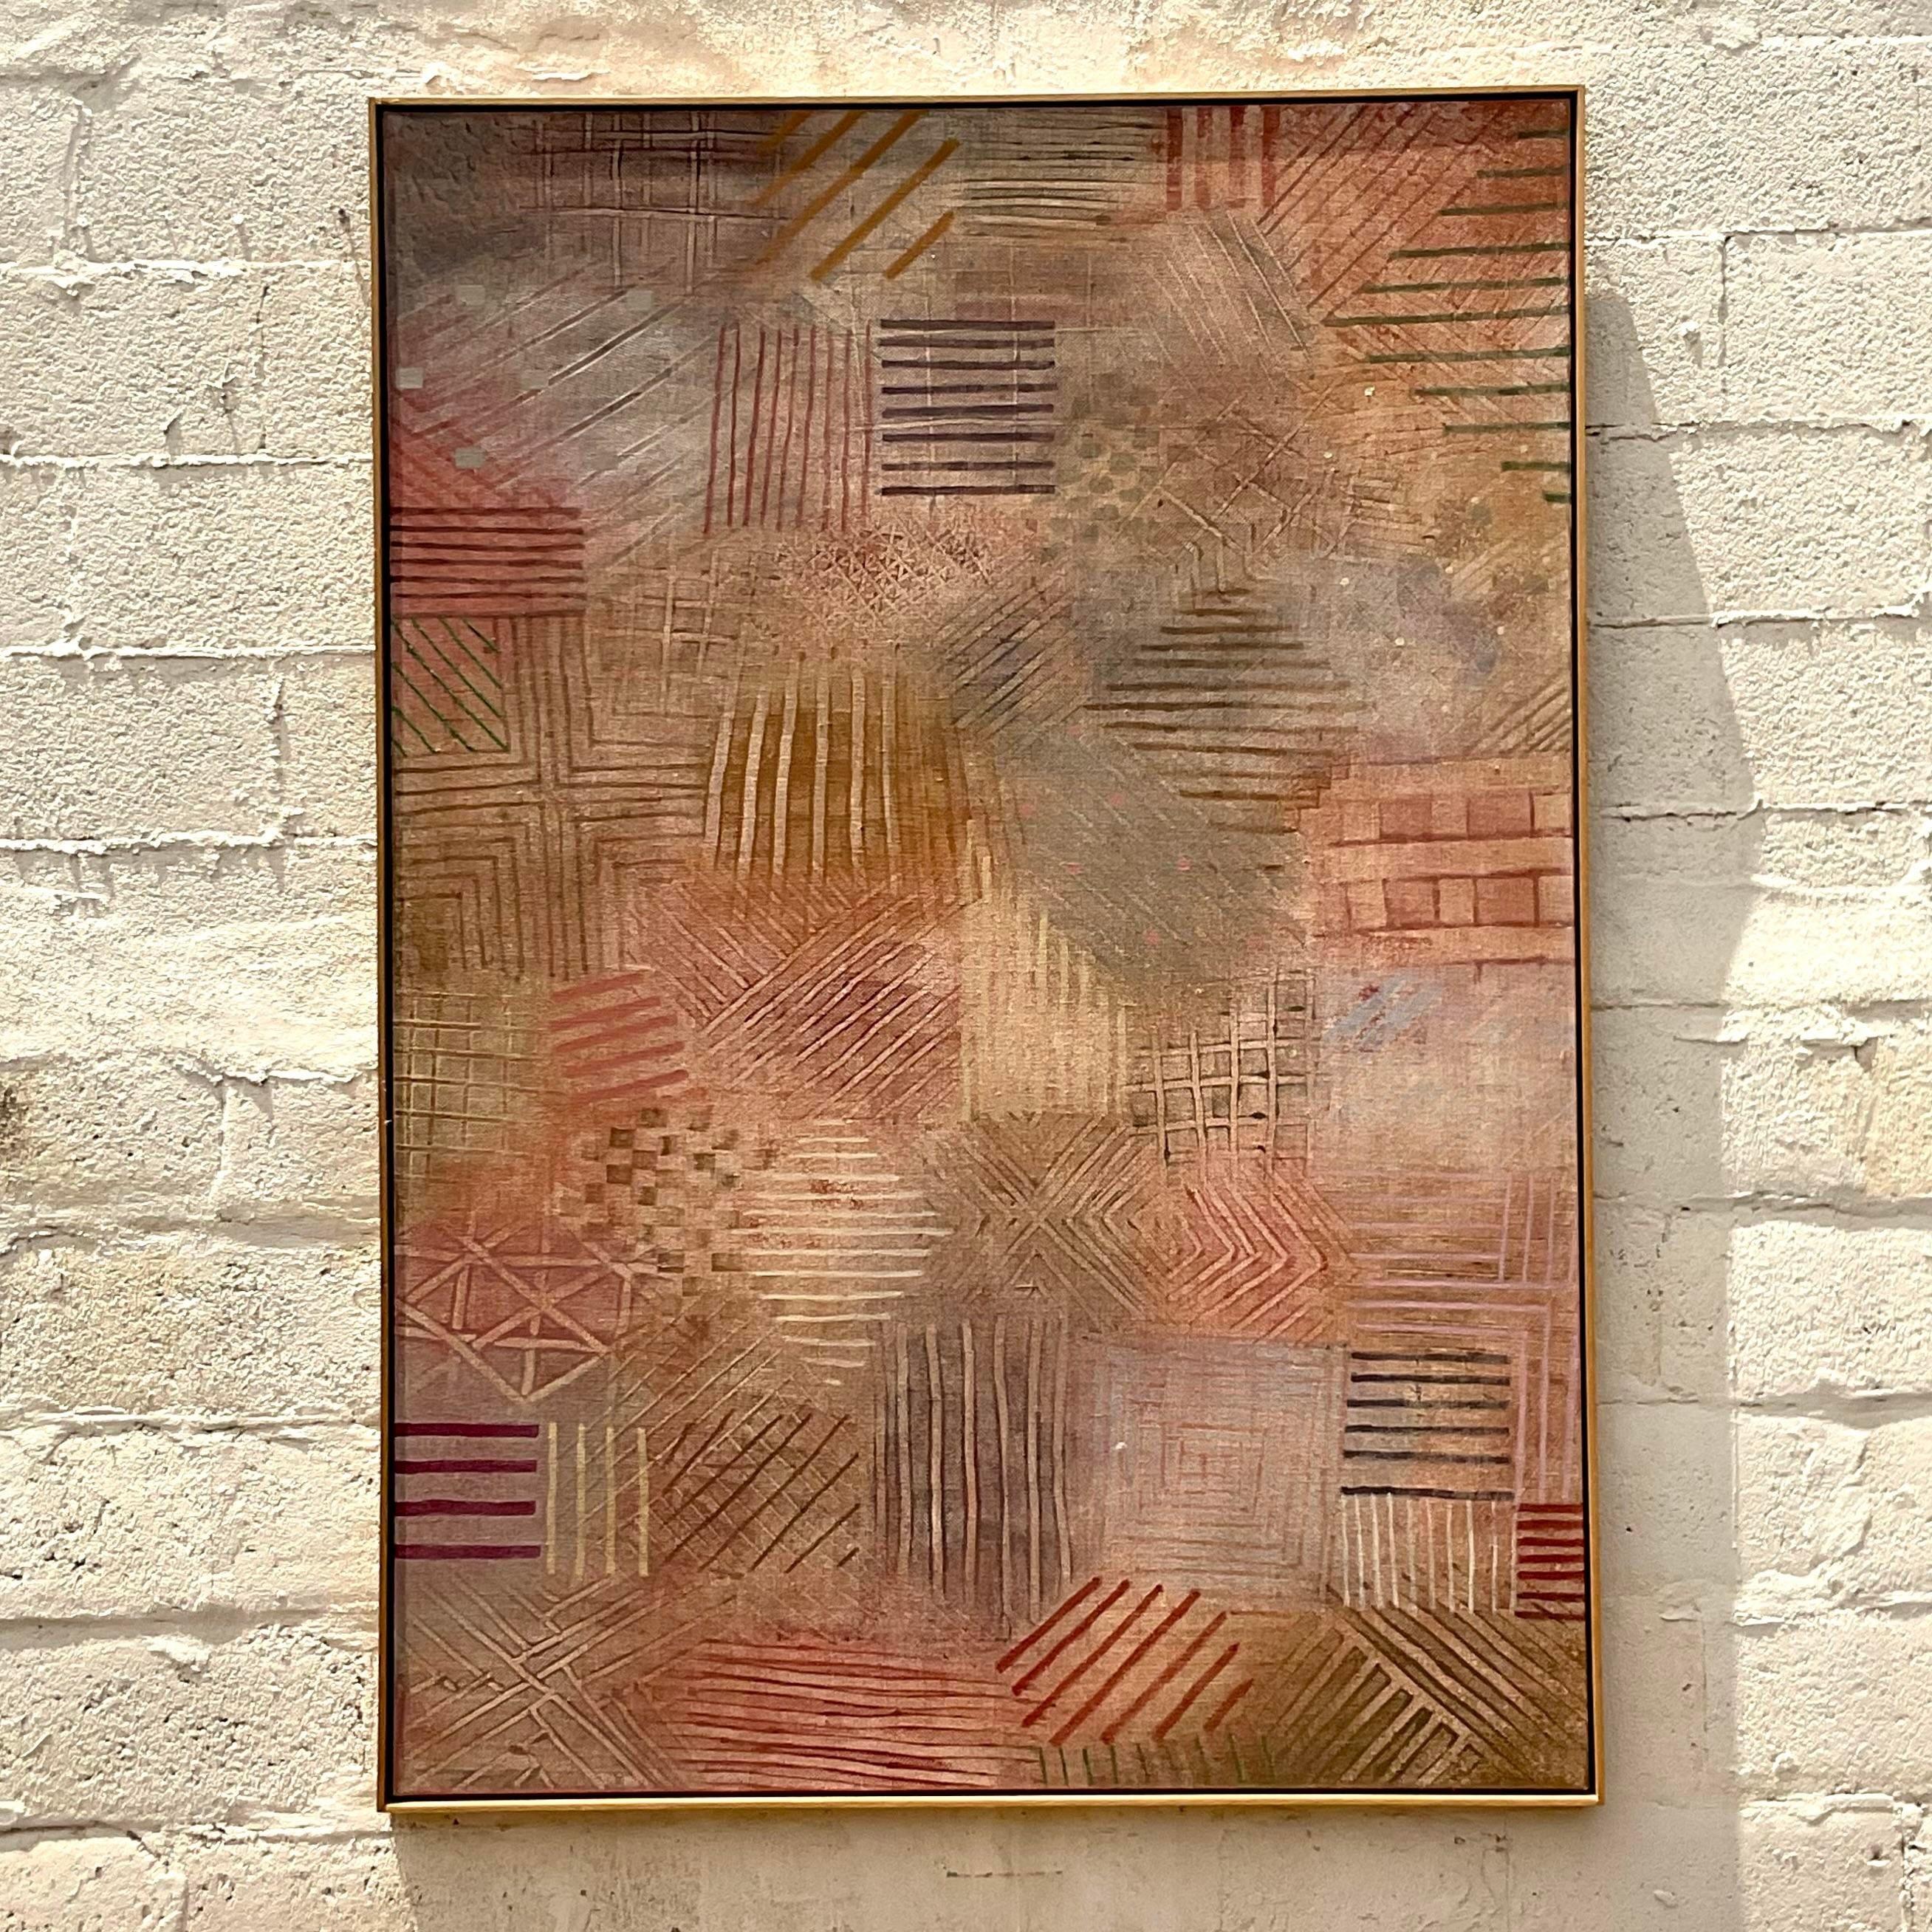 A fantastic vintage Boho original oil painting on canvas. A chic neutral abstract signed and dated by the artist 1983.